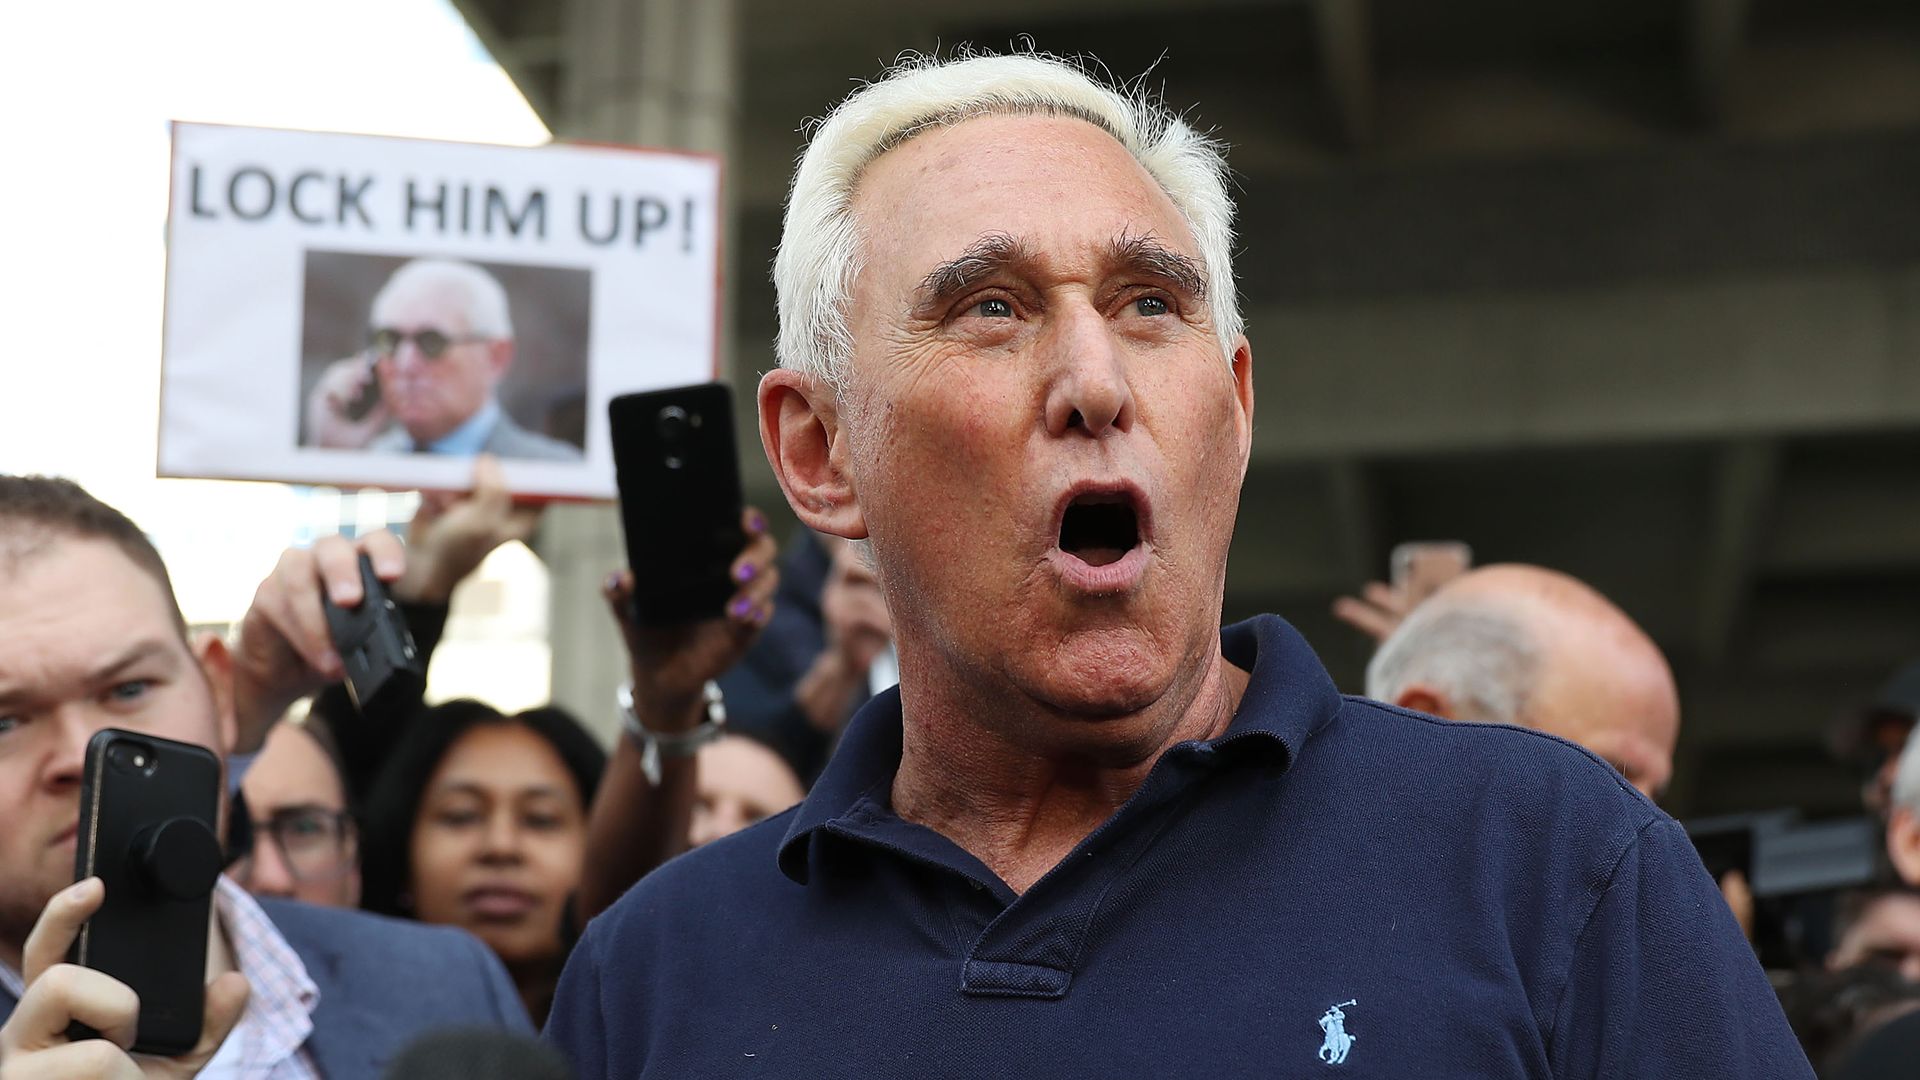 Roger Stone speaks to a crowd after his arrest